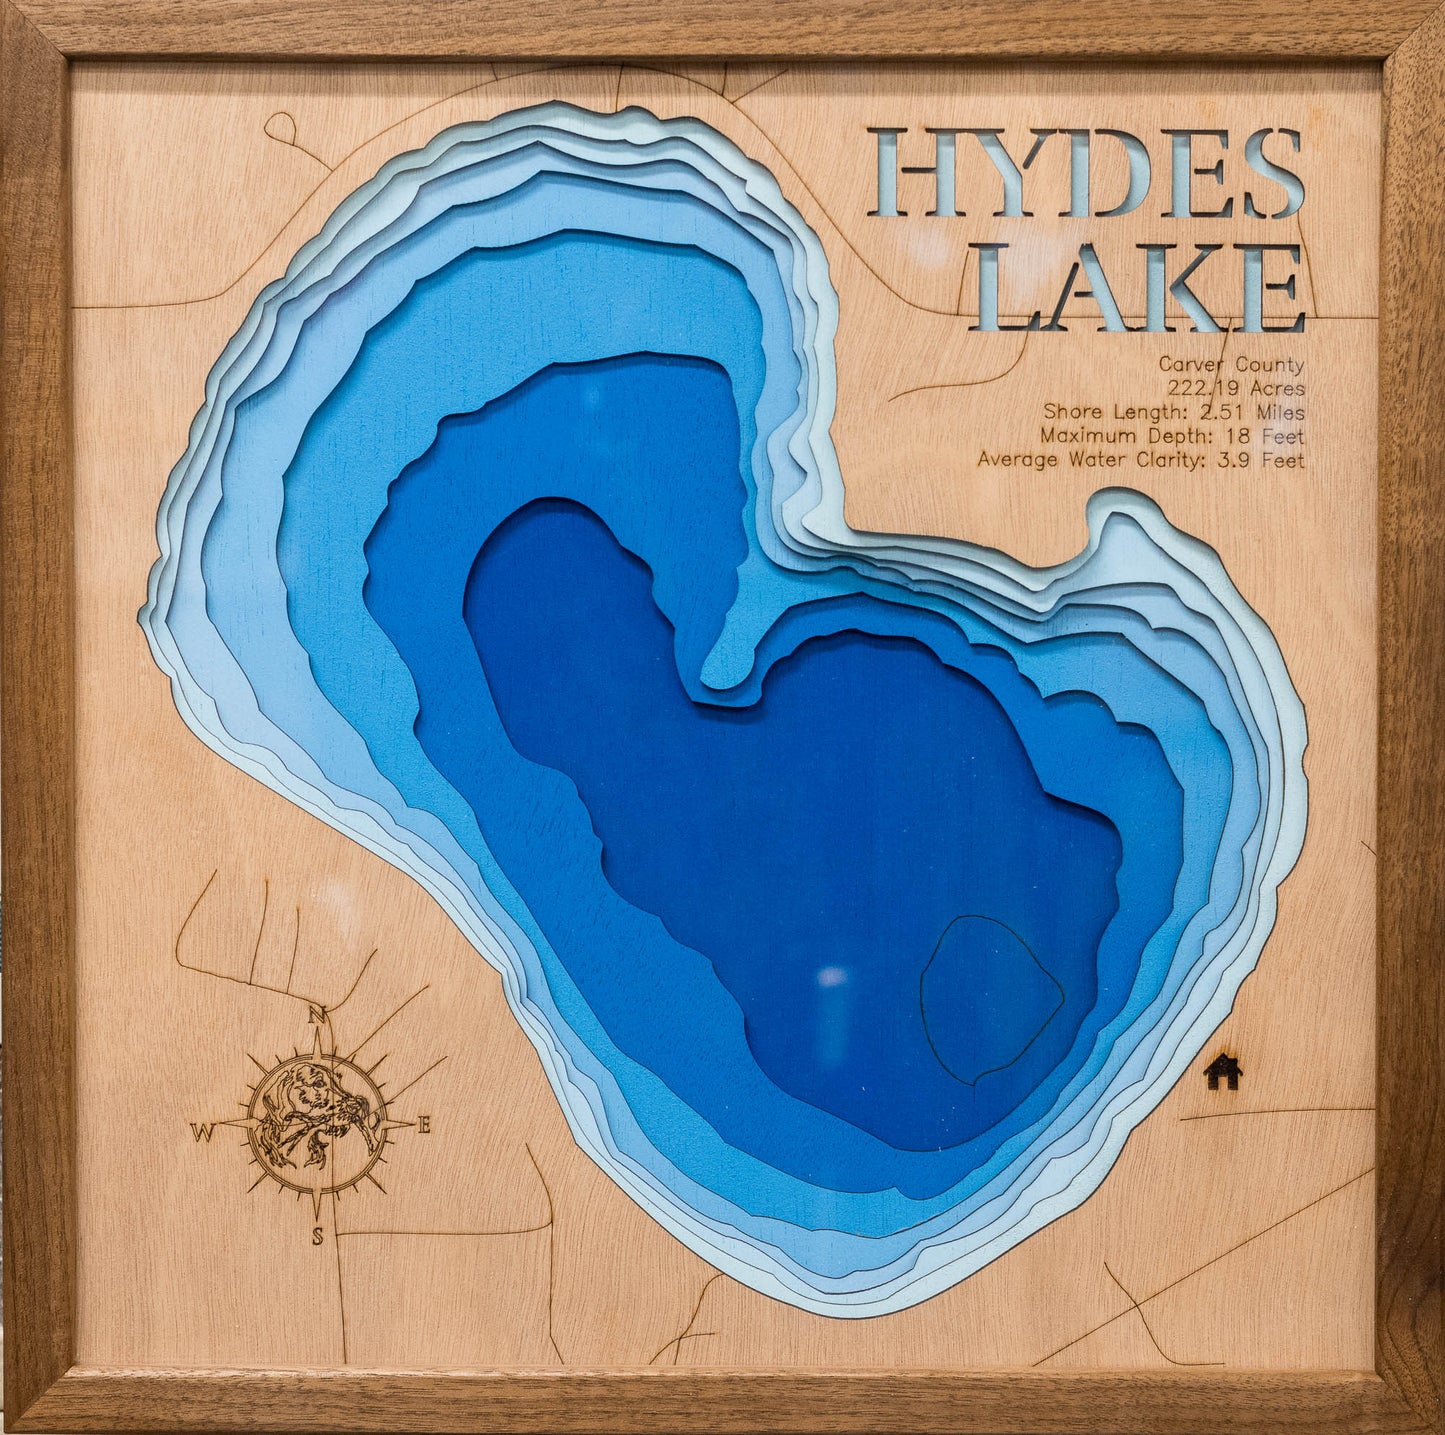 Hydes Lake in Carver County, MN